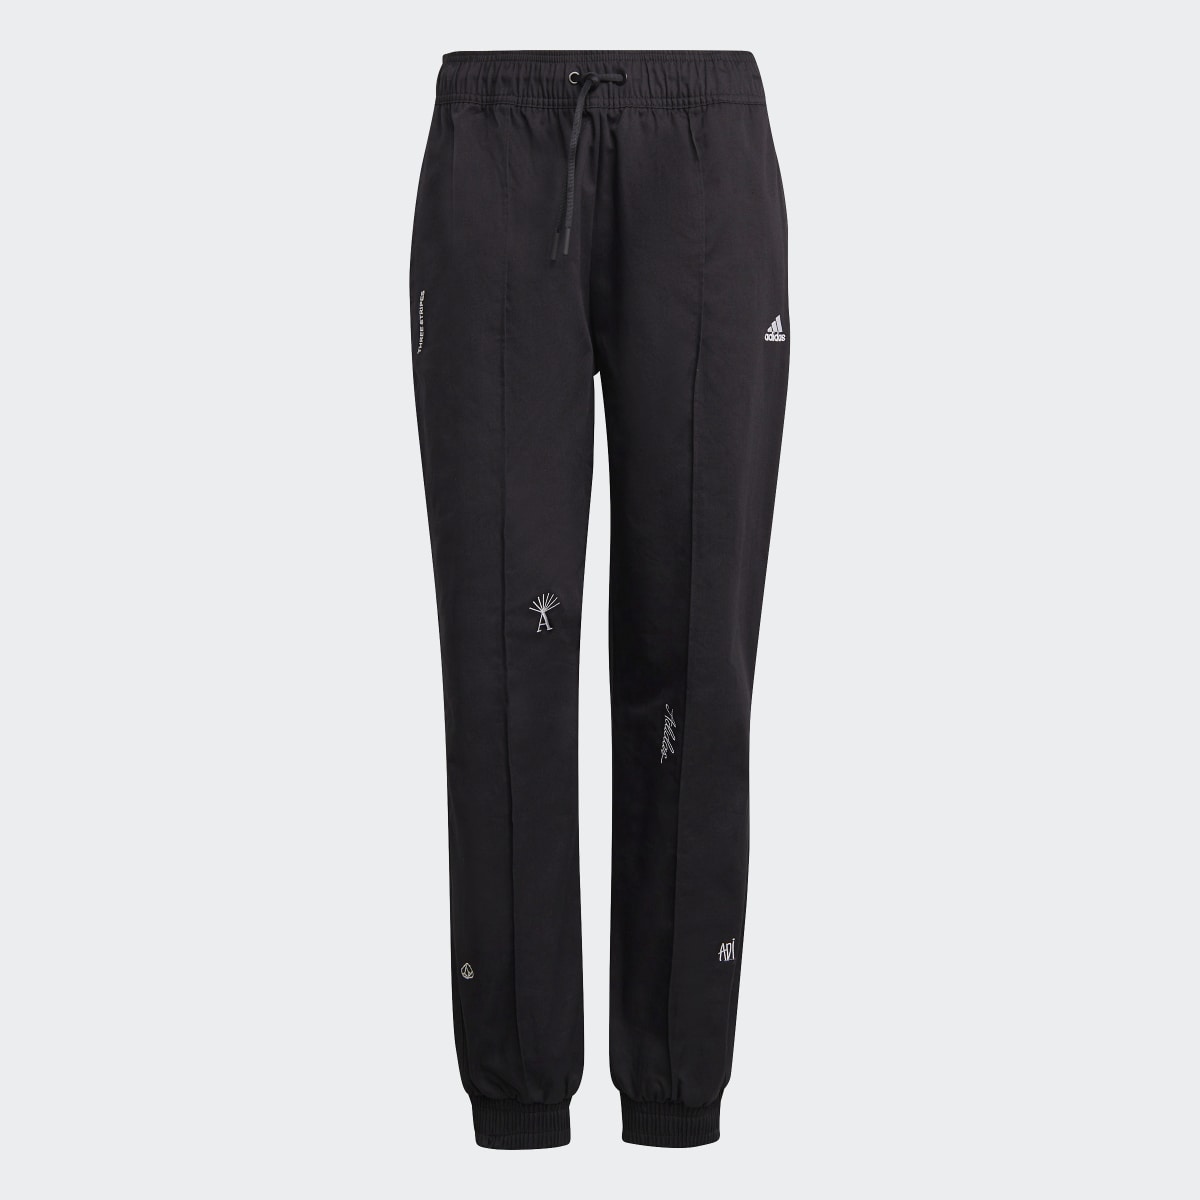 Adidas Loose Trousers with Healing Crystals-Inspired Graphics. 5